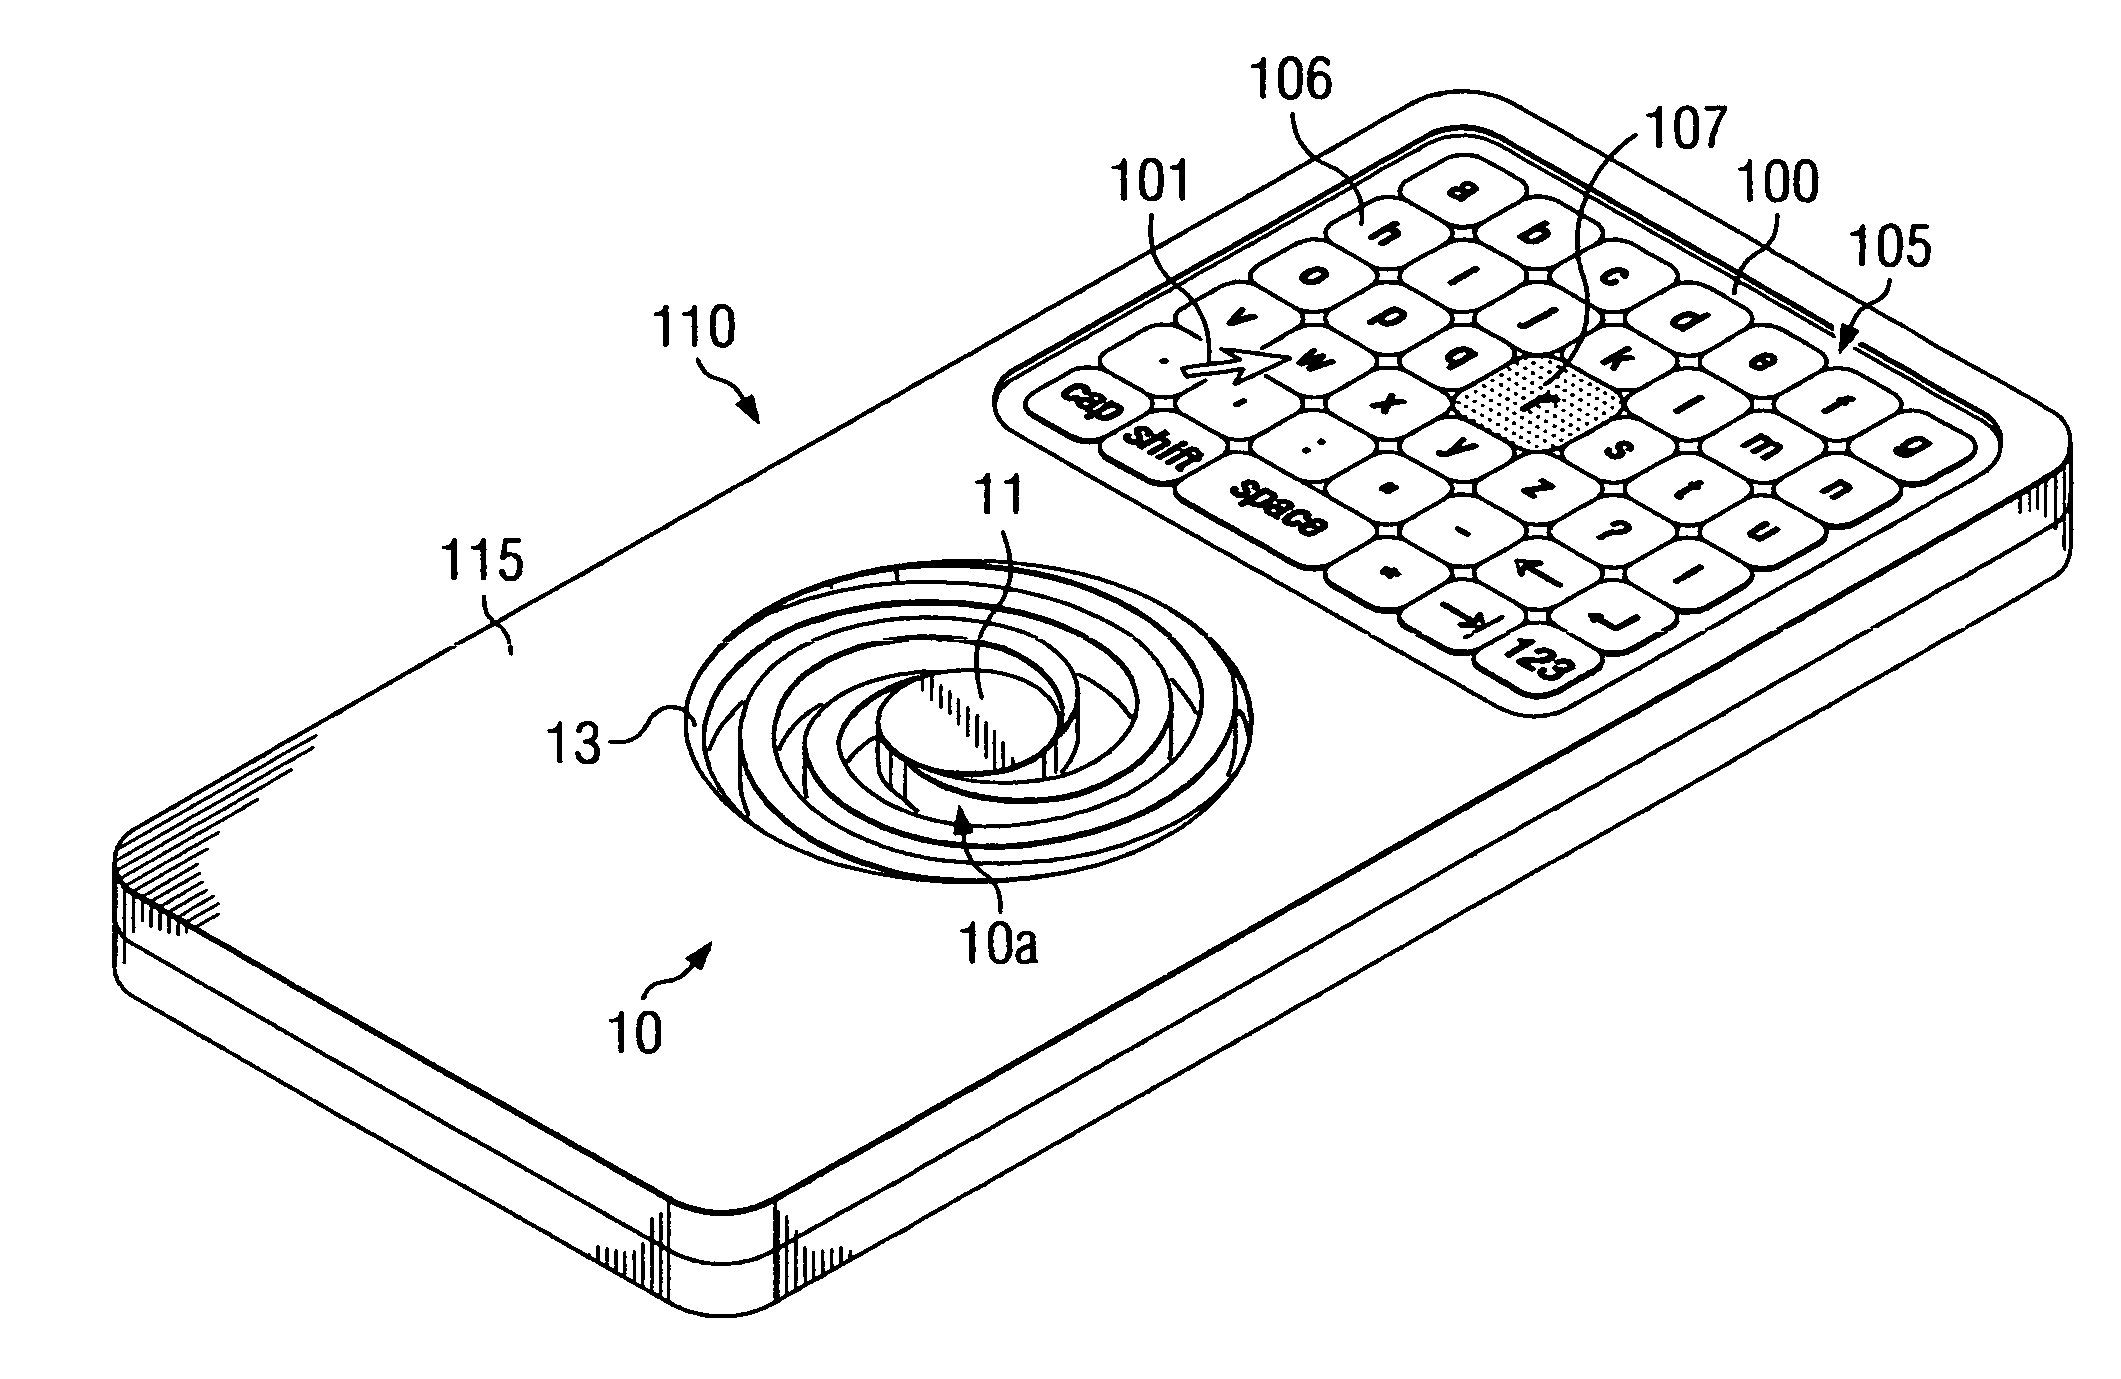 Electronic device and method for simplifying text entry using a soft keyboard